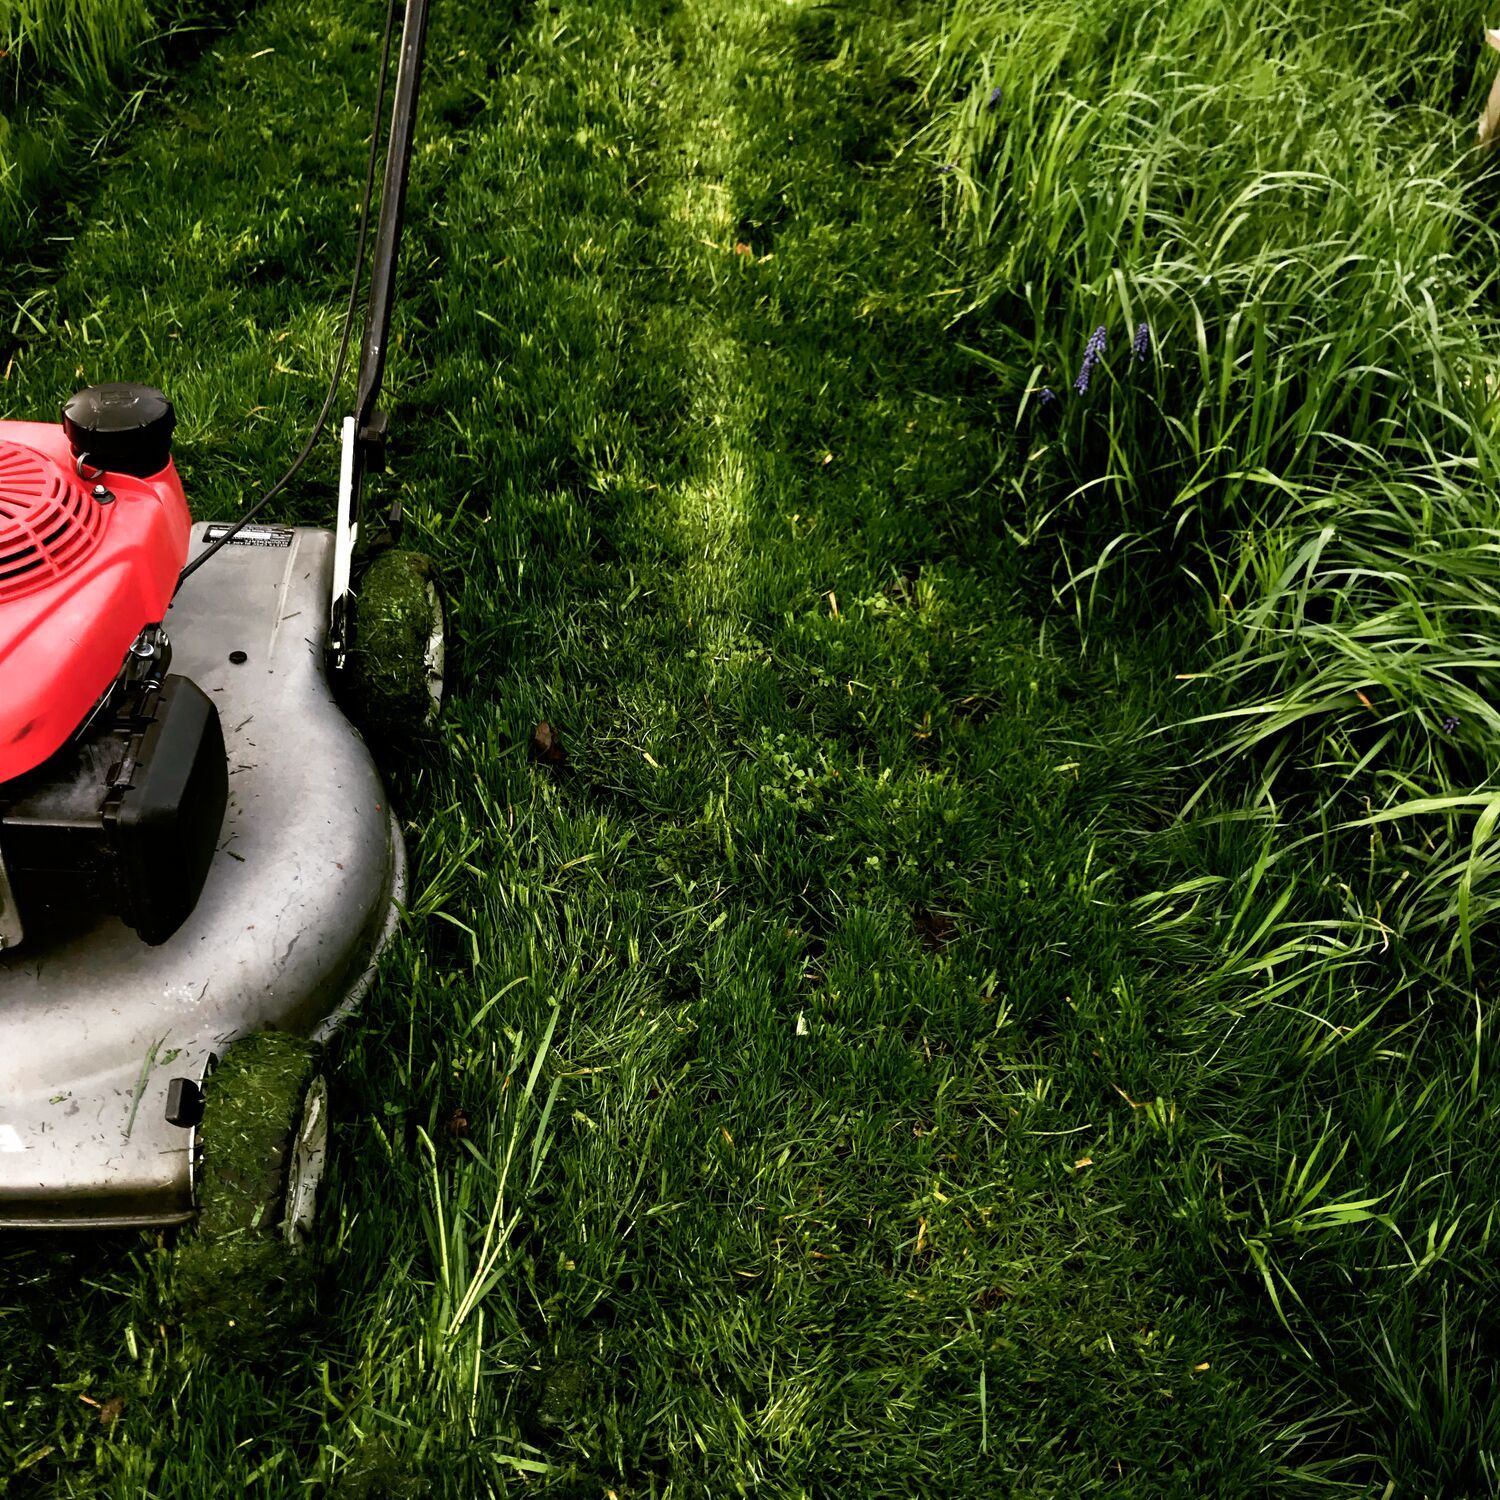 2020 Lawn Mowing Prices - Hourly 